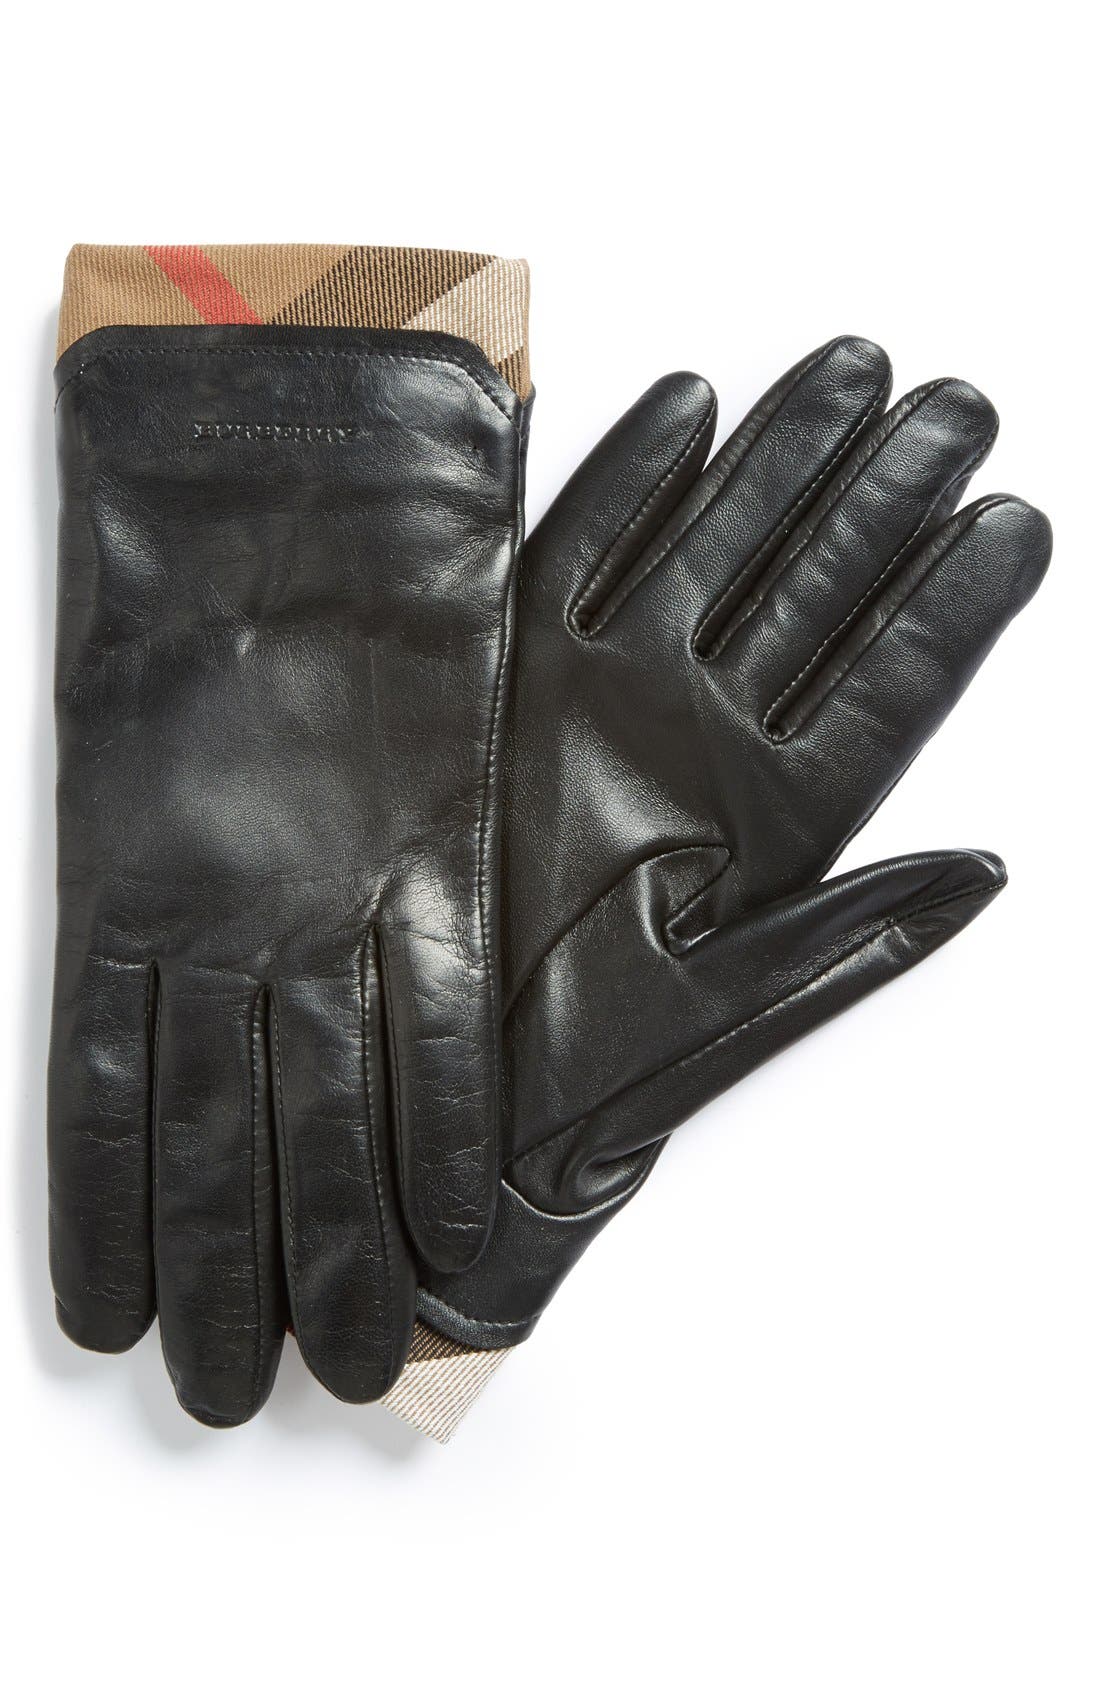 burberry women's leather gloves